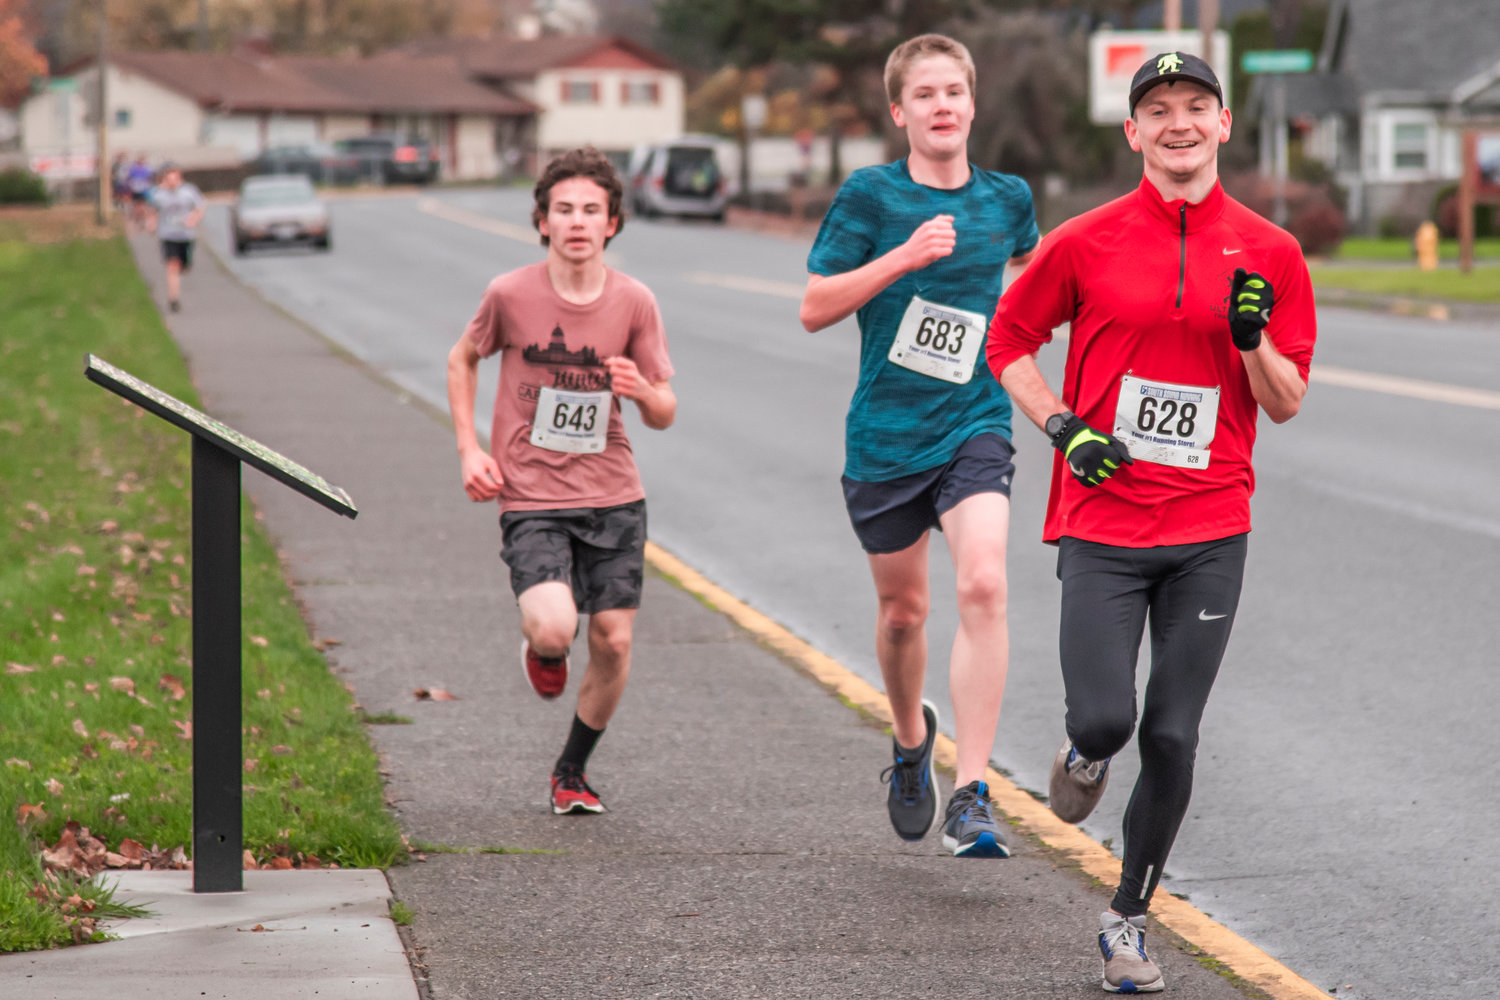 Runners smile as they run around Recreation Park during a Turkey Trot 5K on Thanksgiving Day in Chehalis.